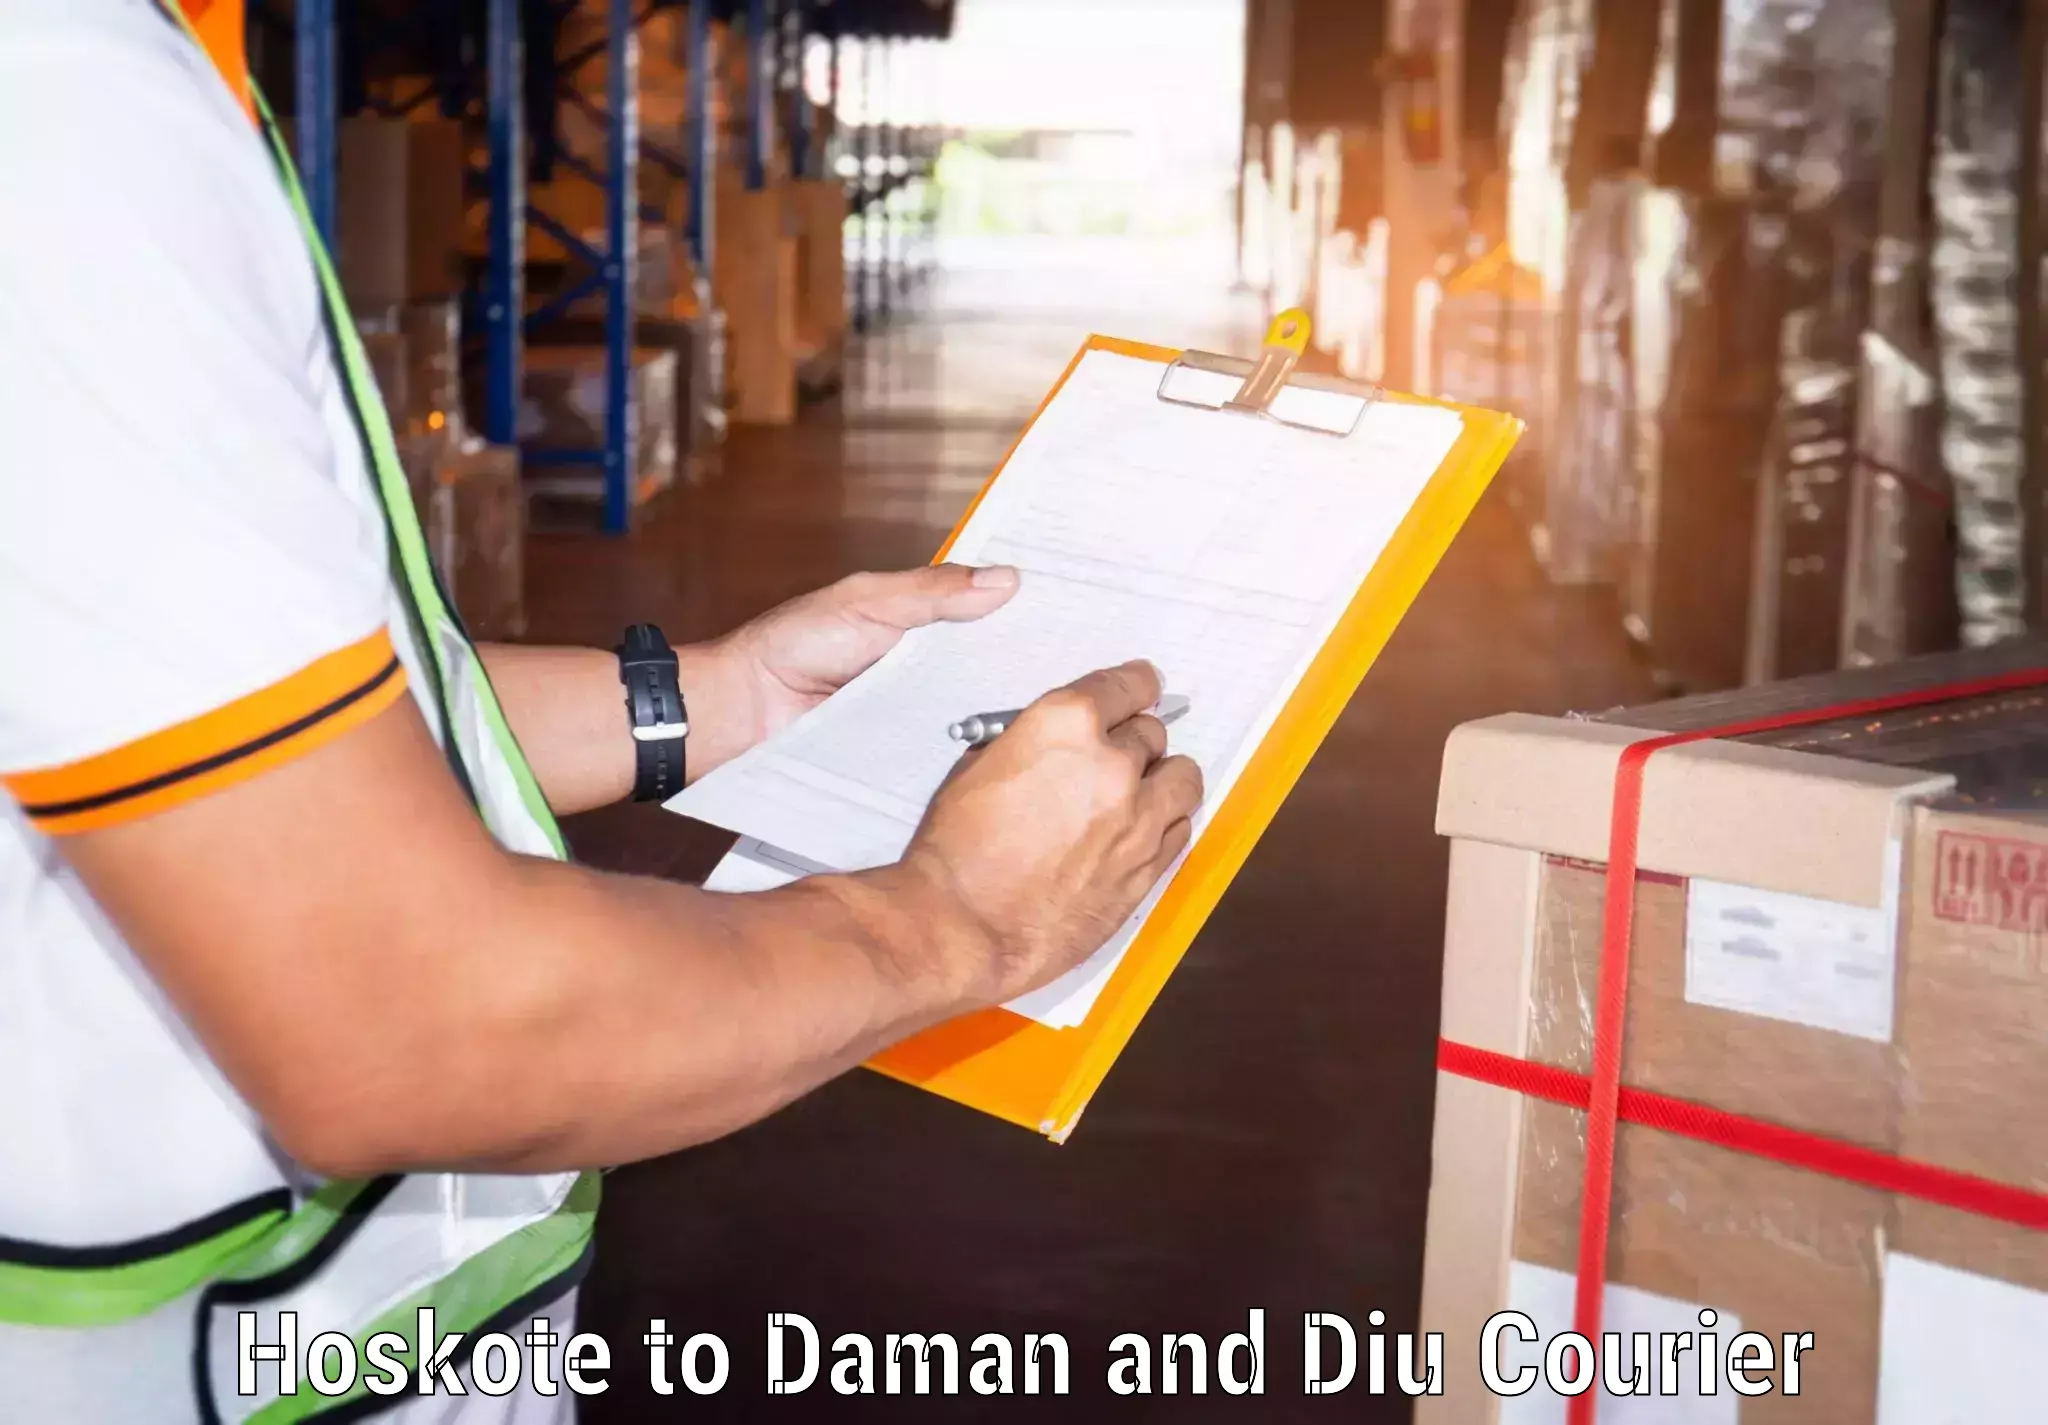 Personal parcel delivery Hoskote to Daman and Diu